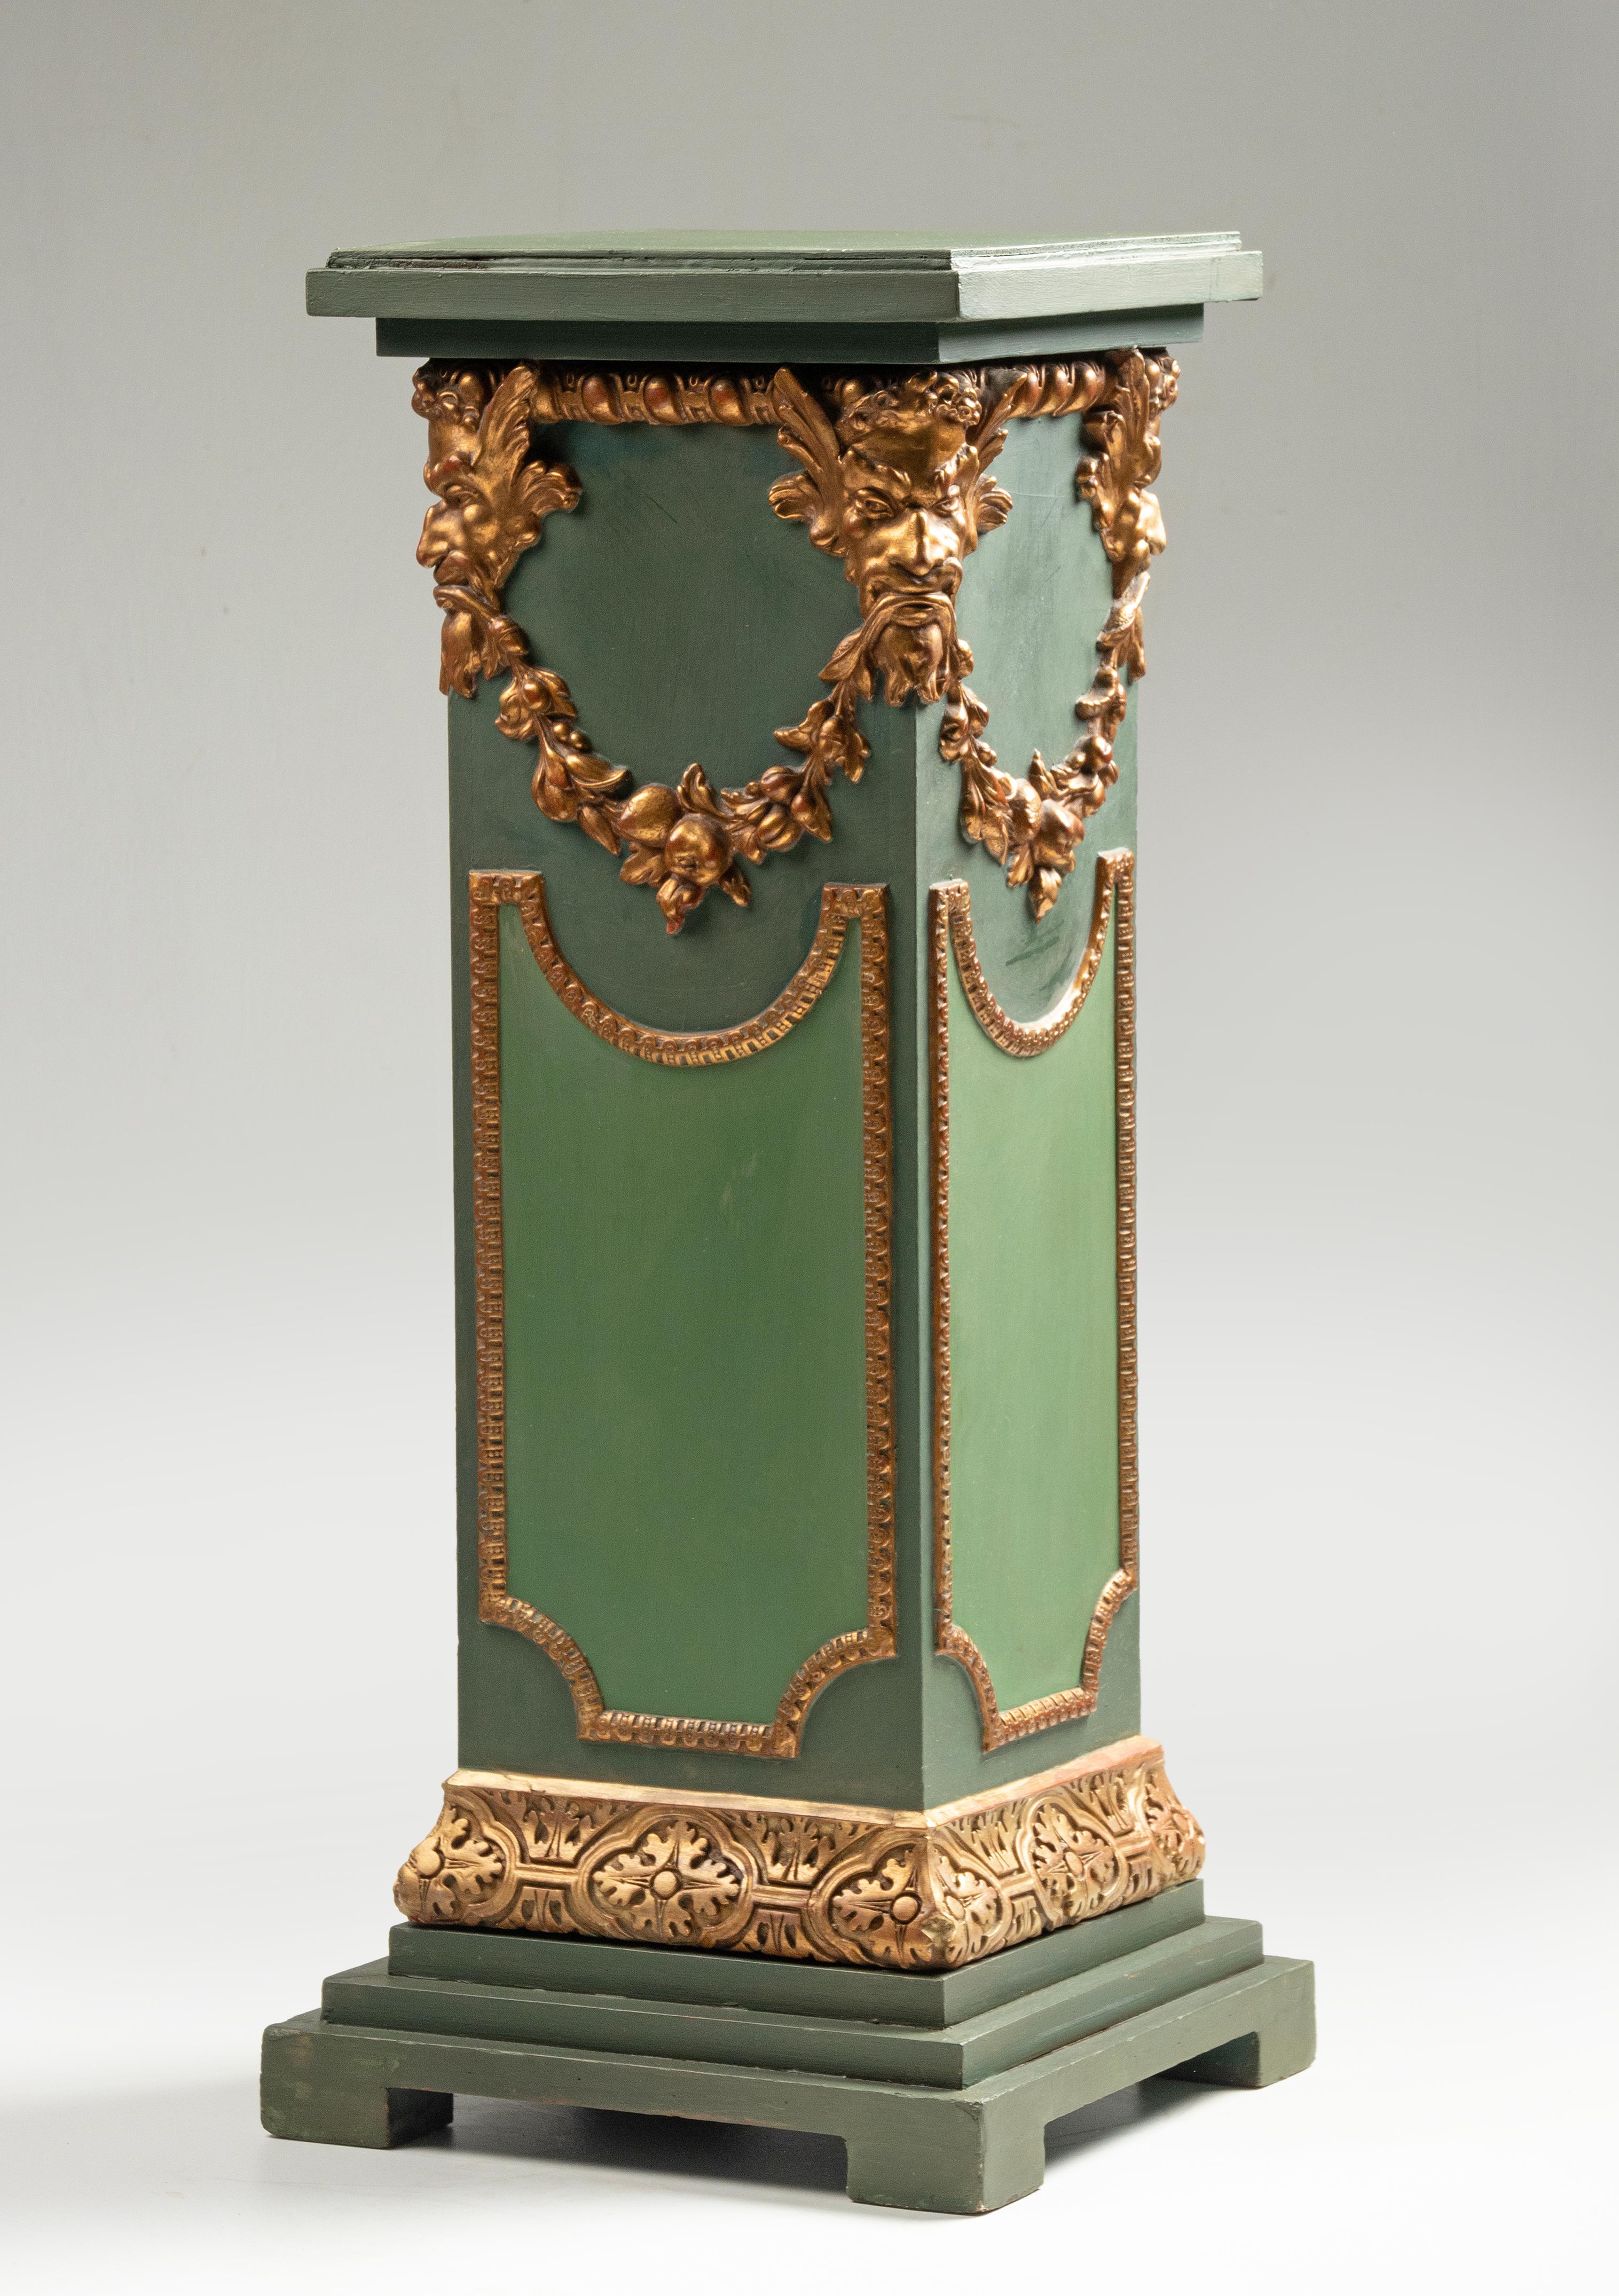 A green patinated pedestal in Renaissance style. The column is made of carved wood, with gilded garlands, heads and panel-moldings. A beautiful piece of furniture to set up a large vase, or a sculpture. Made in France, 1890-1900.

Dimensions: 83 (h)